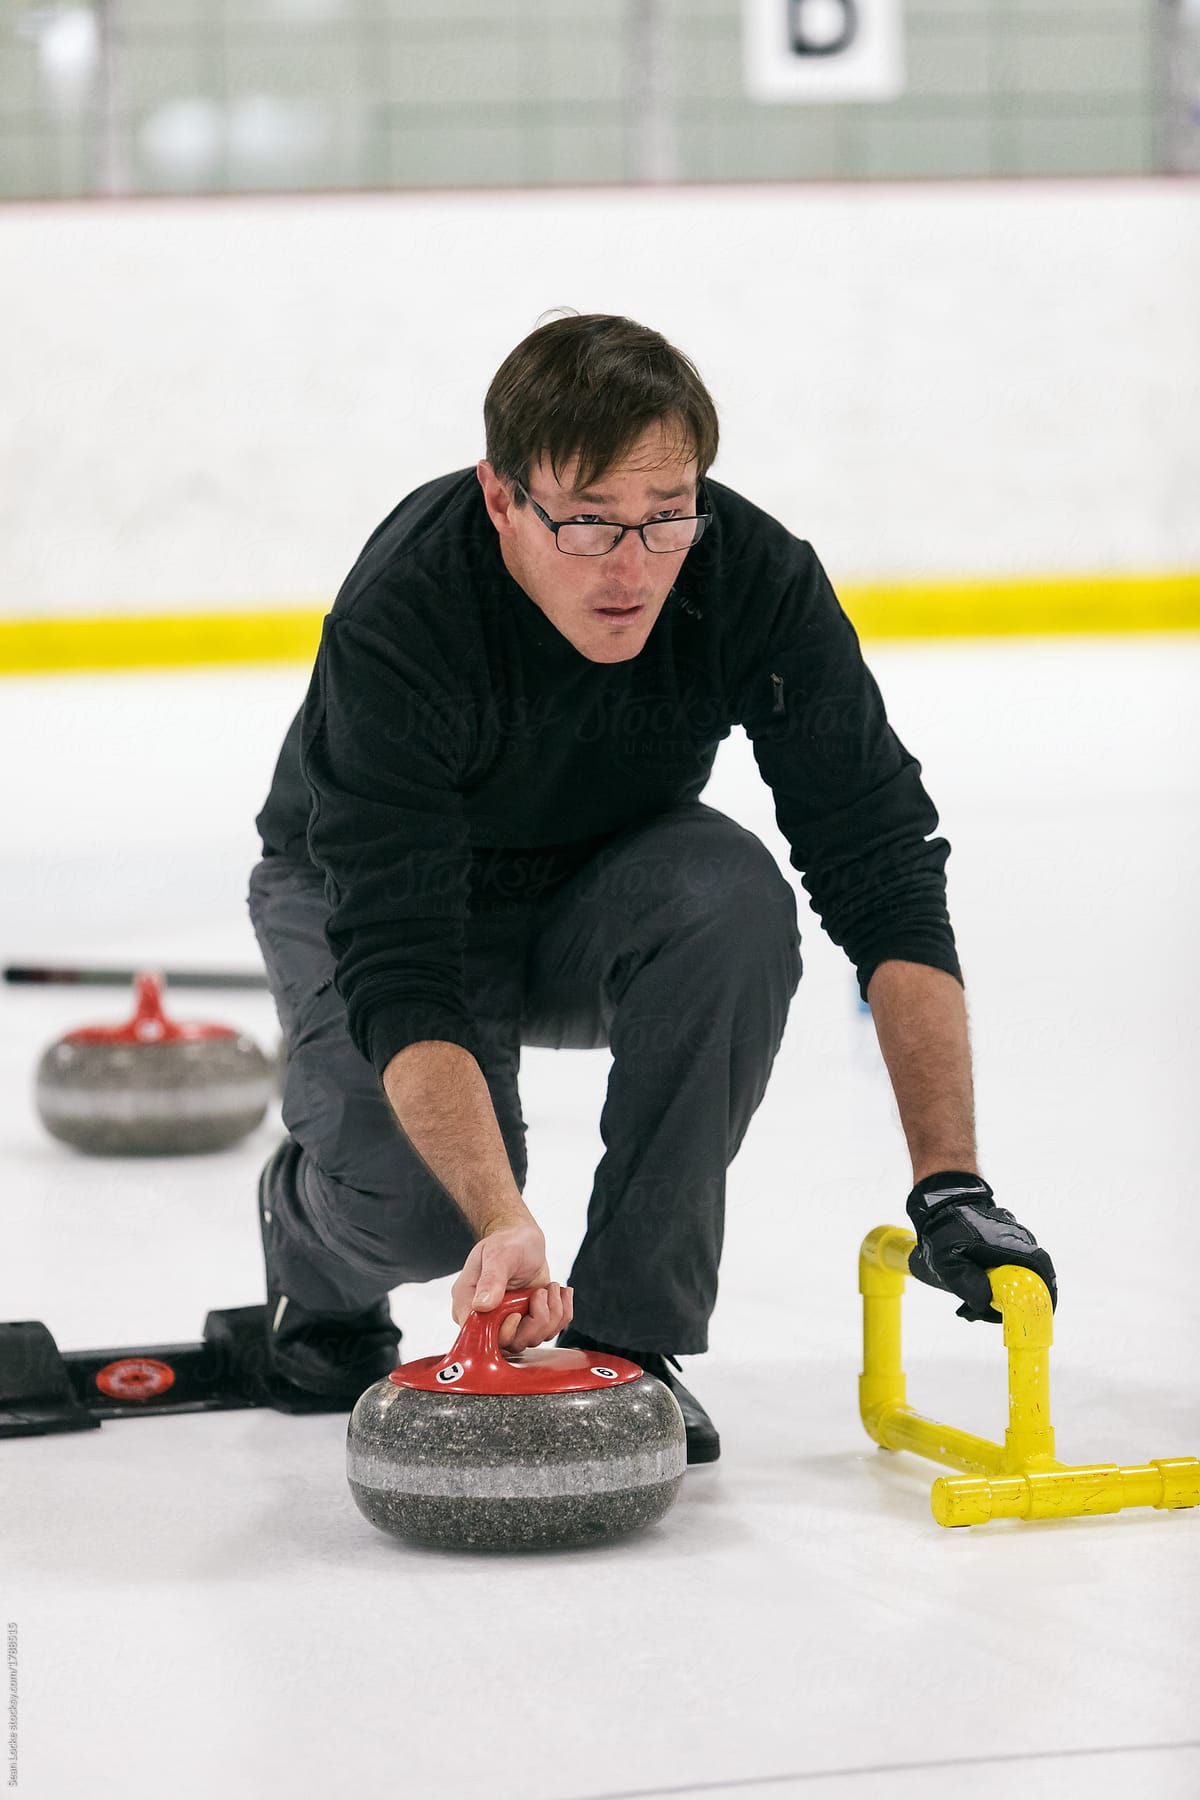 Curling: Male Player Pushing Off From Hack